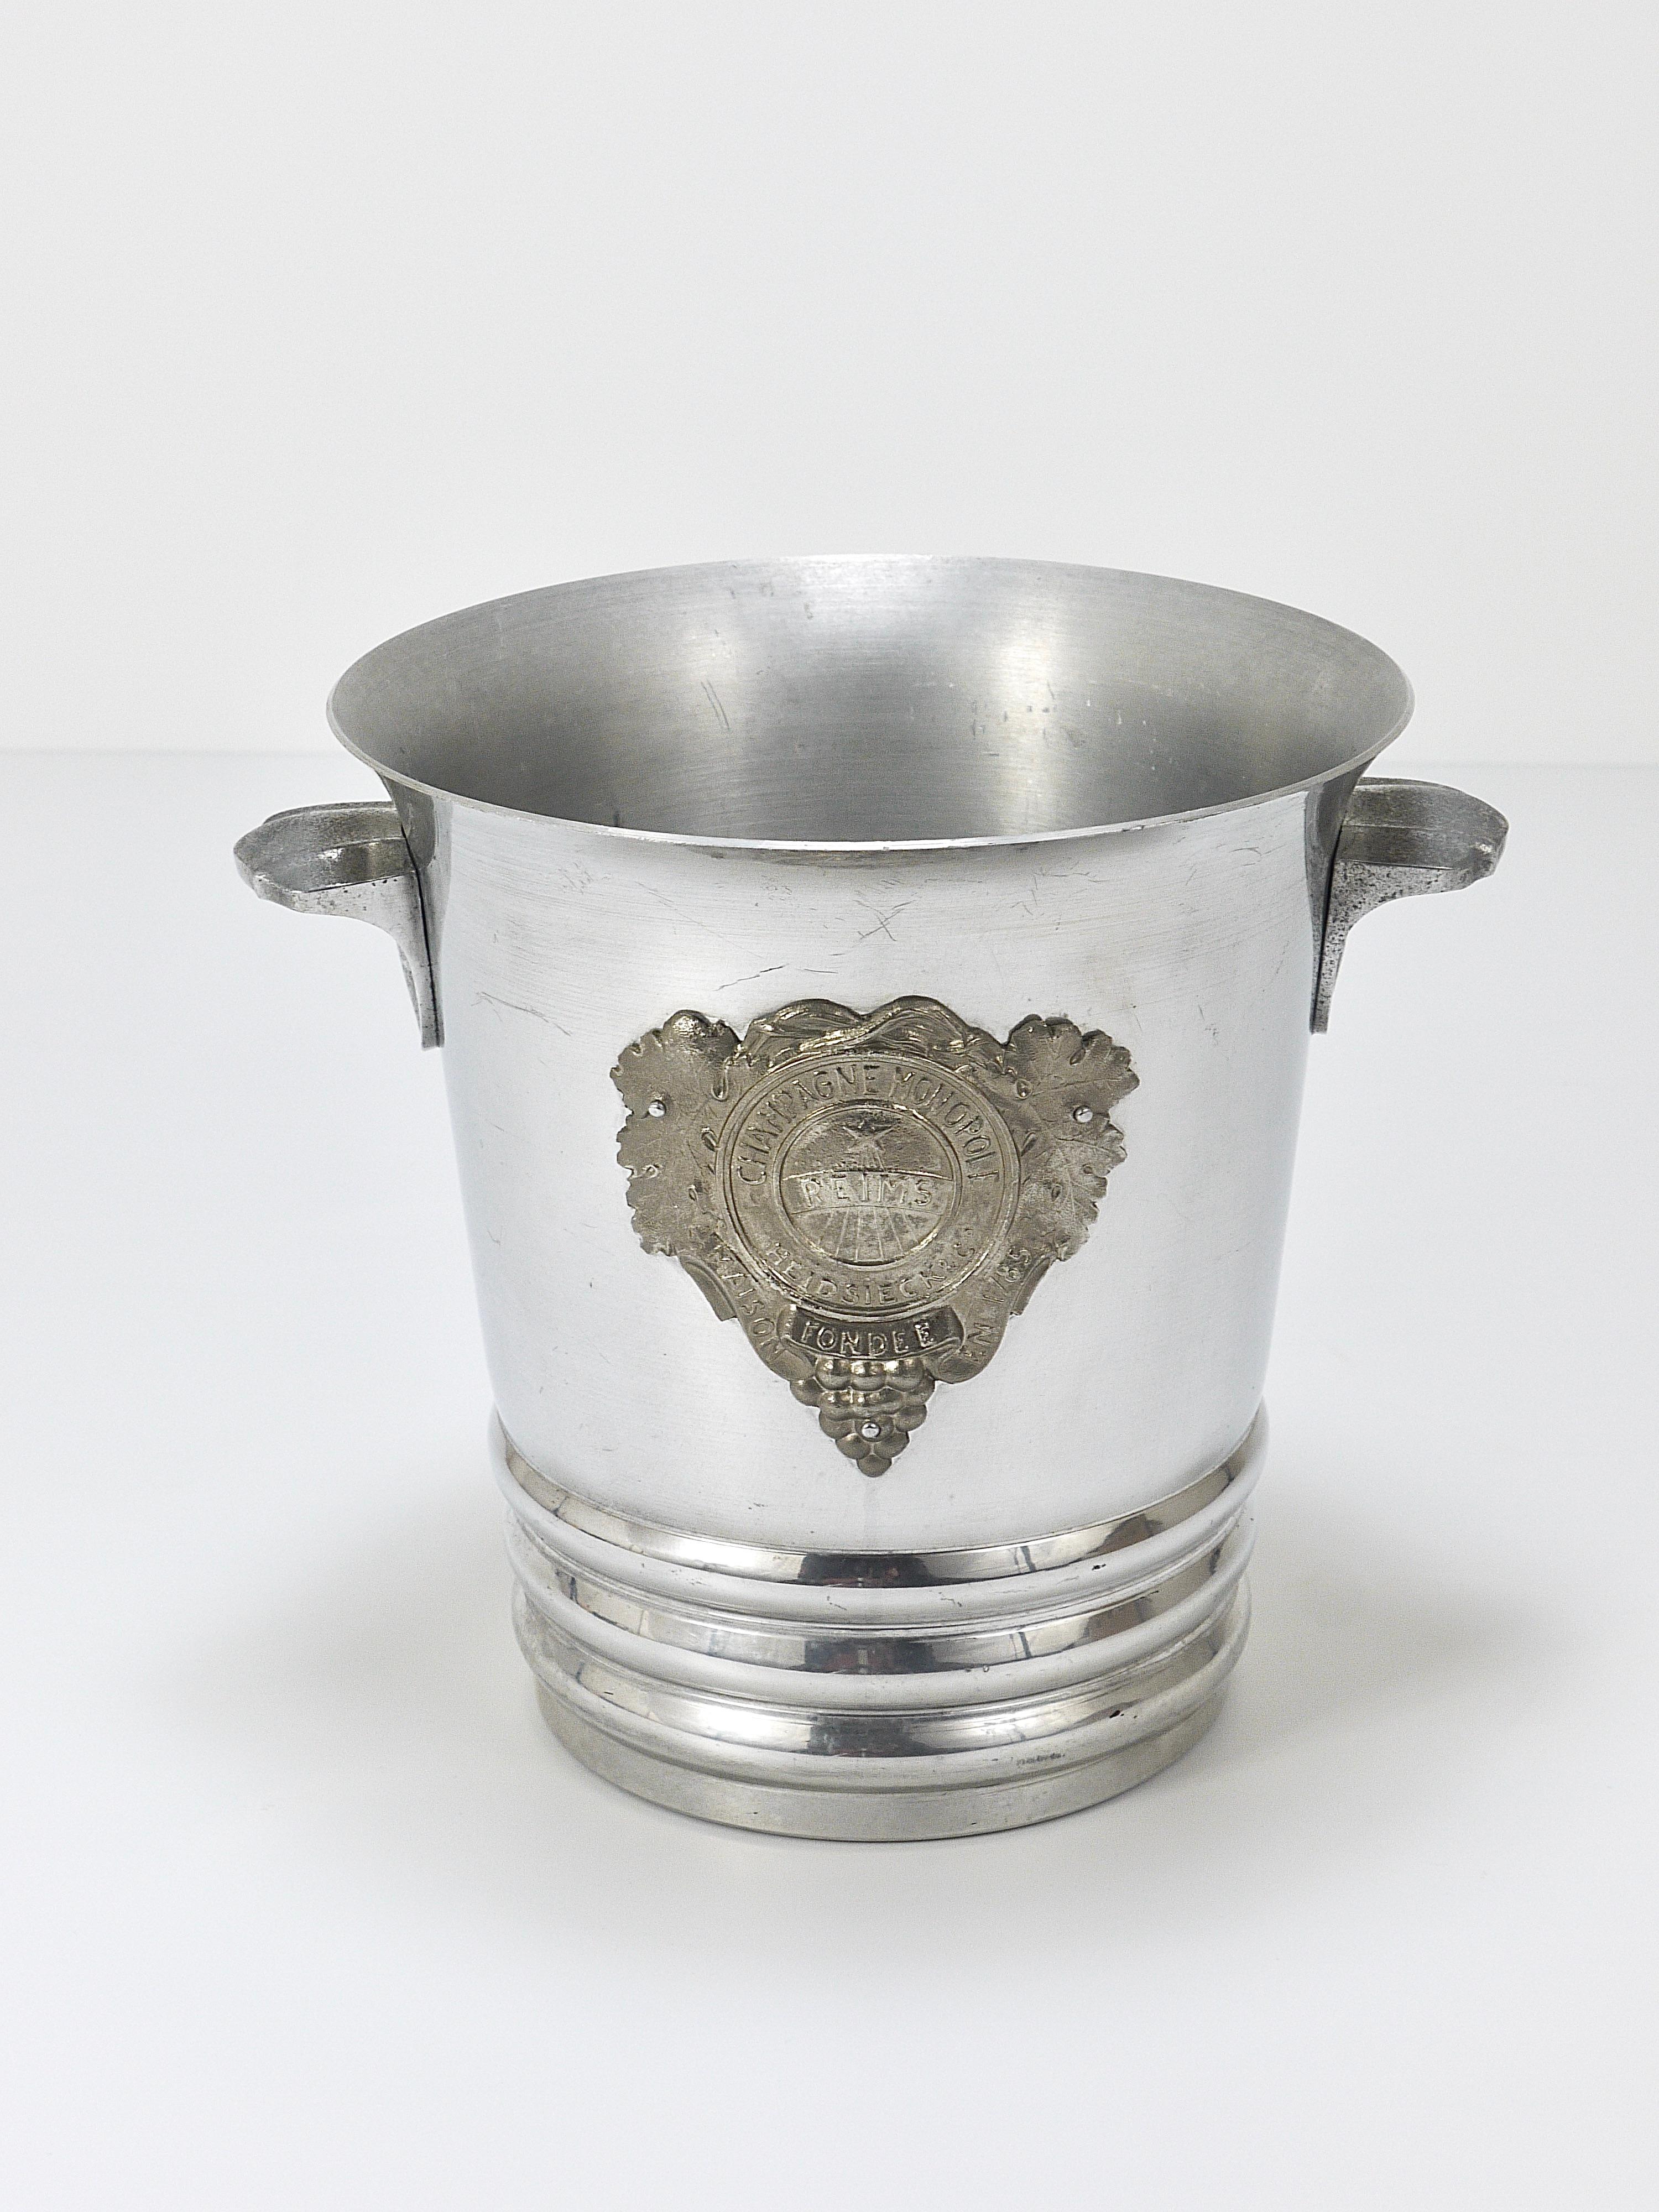 A beautiful Art Deco Champagne bucket from the 1930s / 1940s  by Champagne Monopole Heidsieck & Co. Made of polished aluminum with two nice handles and a decorative badge with  grapevines  and Heidsieck & Co lettering on its front. The handles and